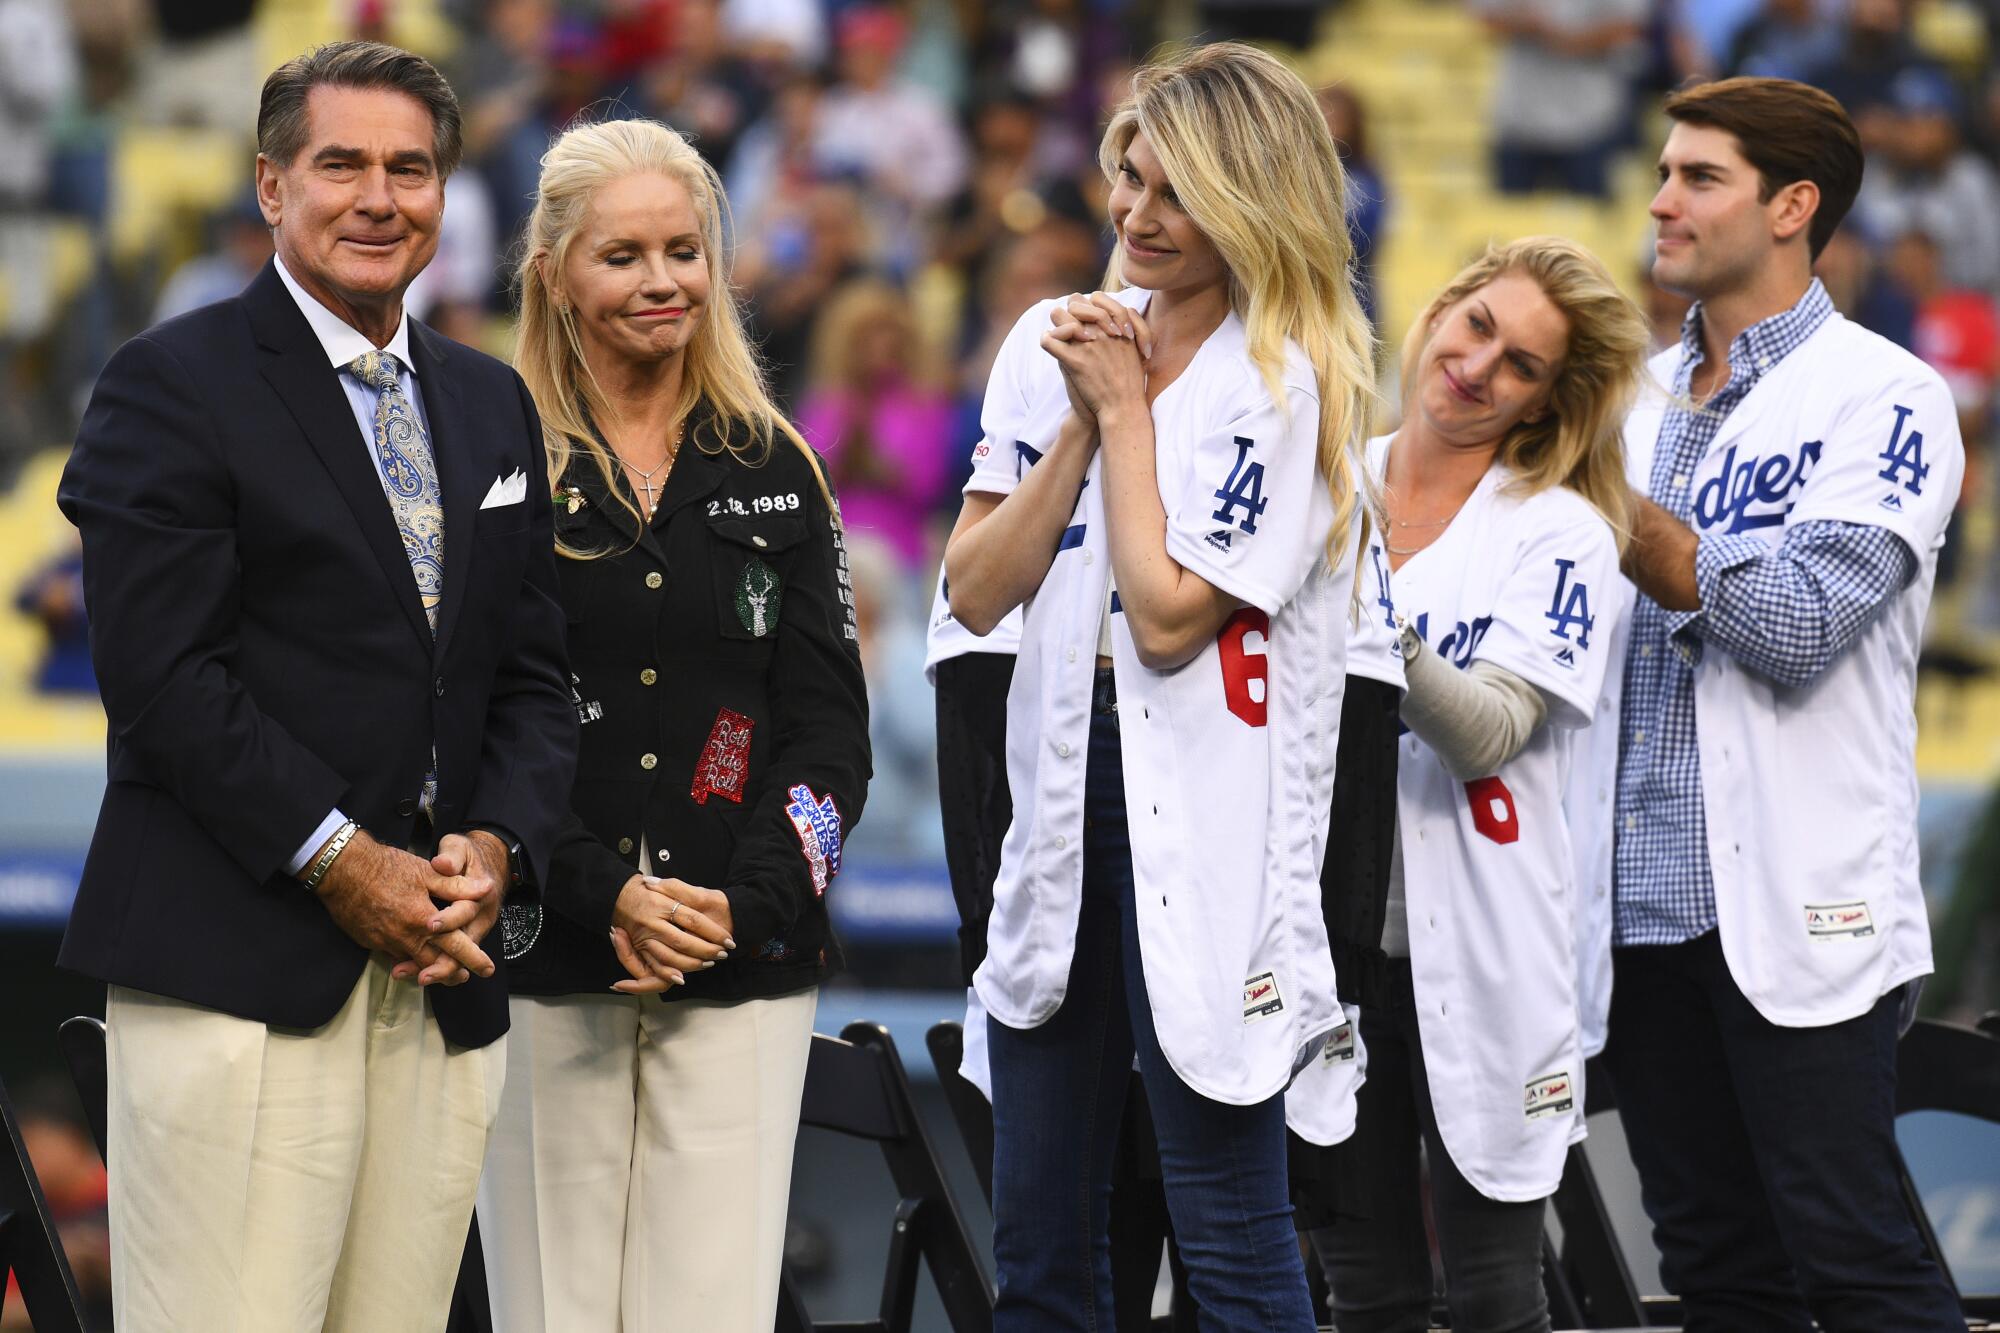 Steve Garvey stands with some members of his family.